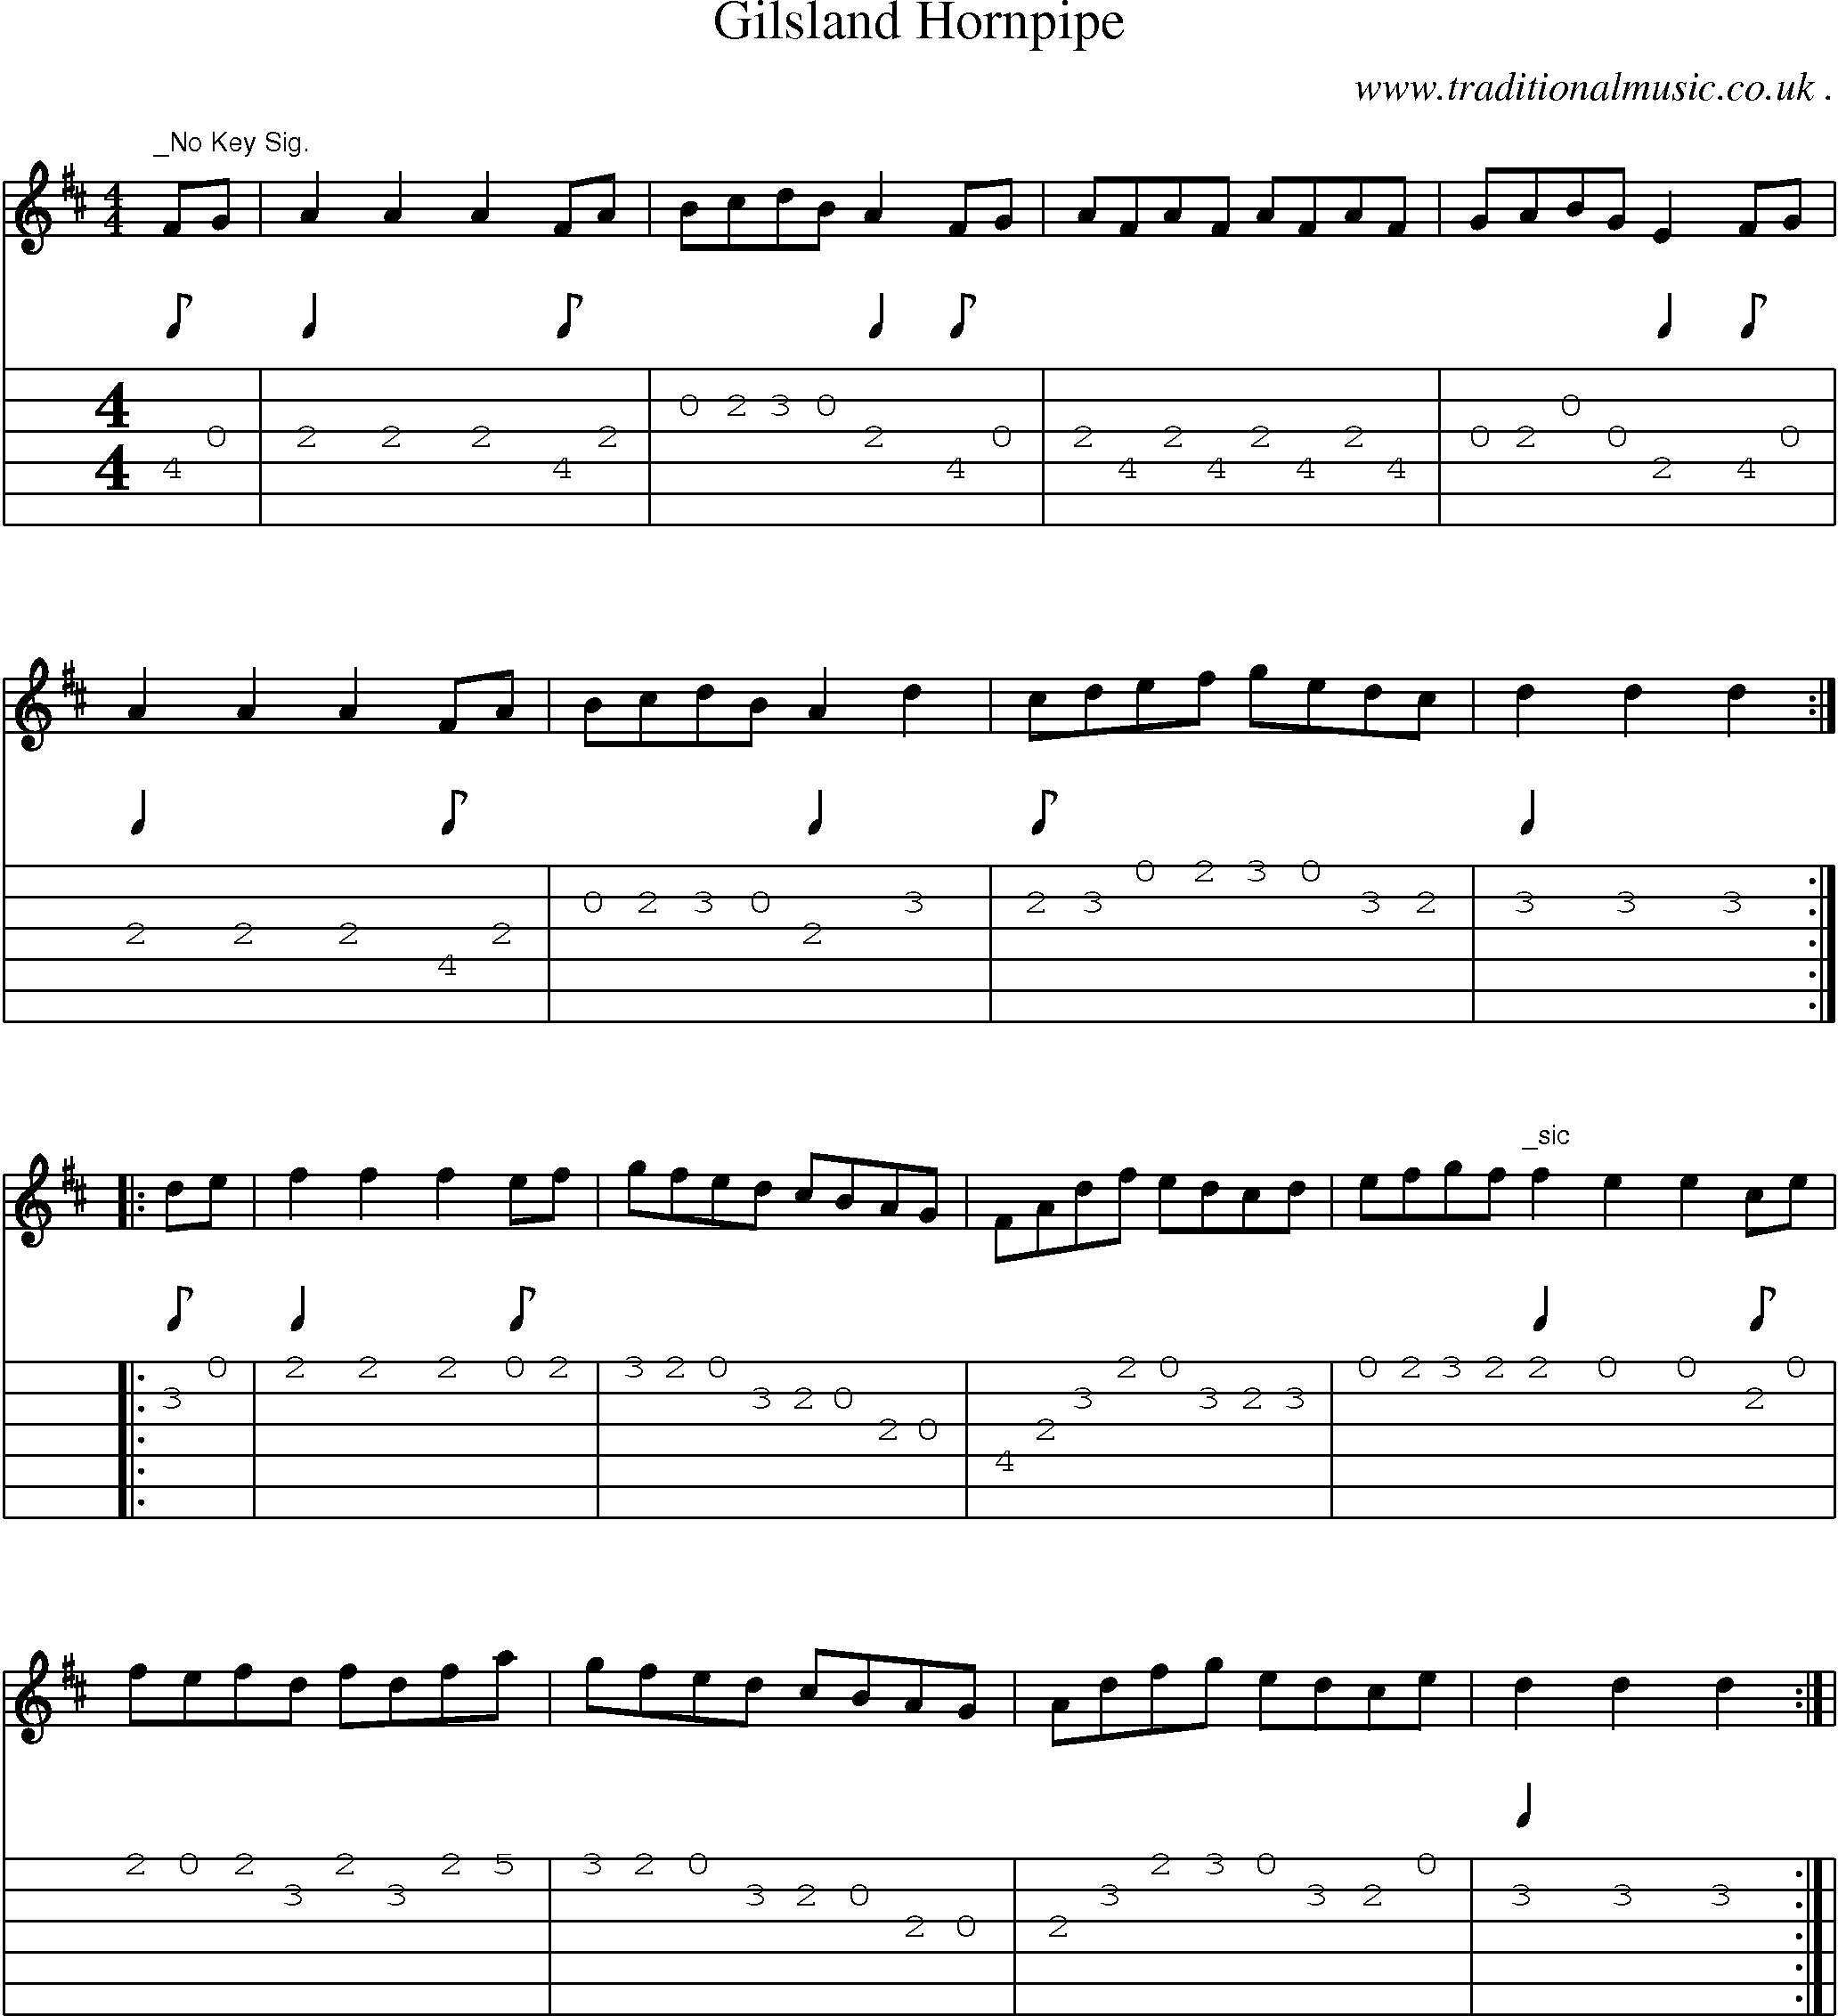 Sheet-Music and Guitar Tabs for Gilsland Hornpipe